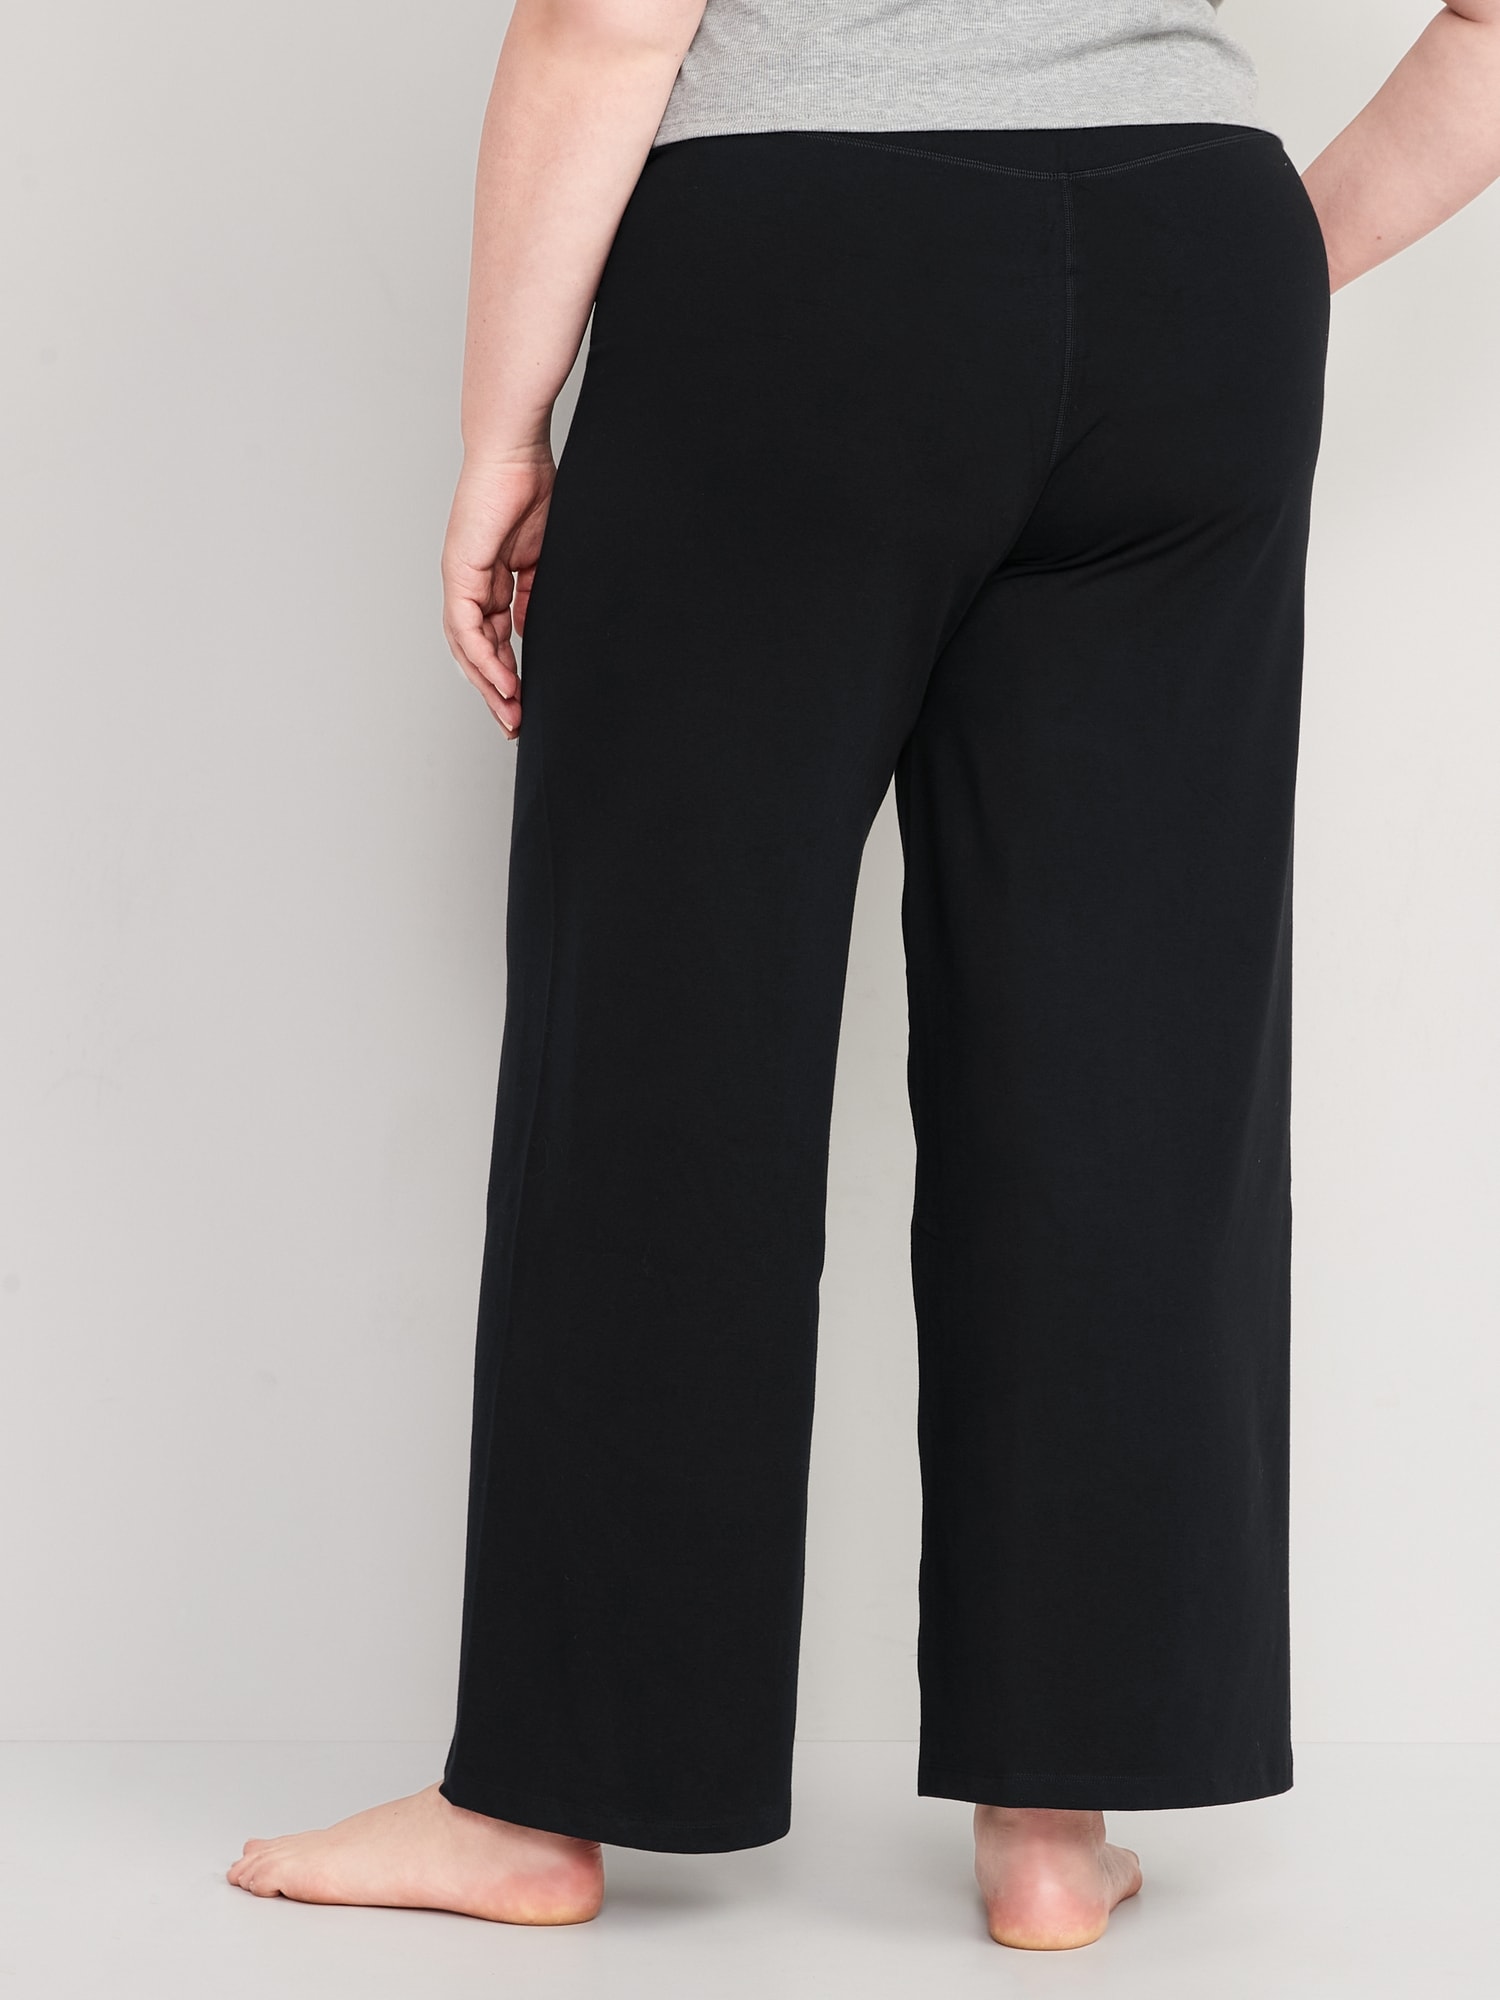 Wide Leg Yoga Pant - One Size to Fit 8-14 – Aware the social